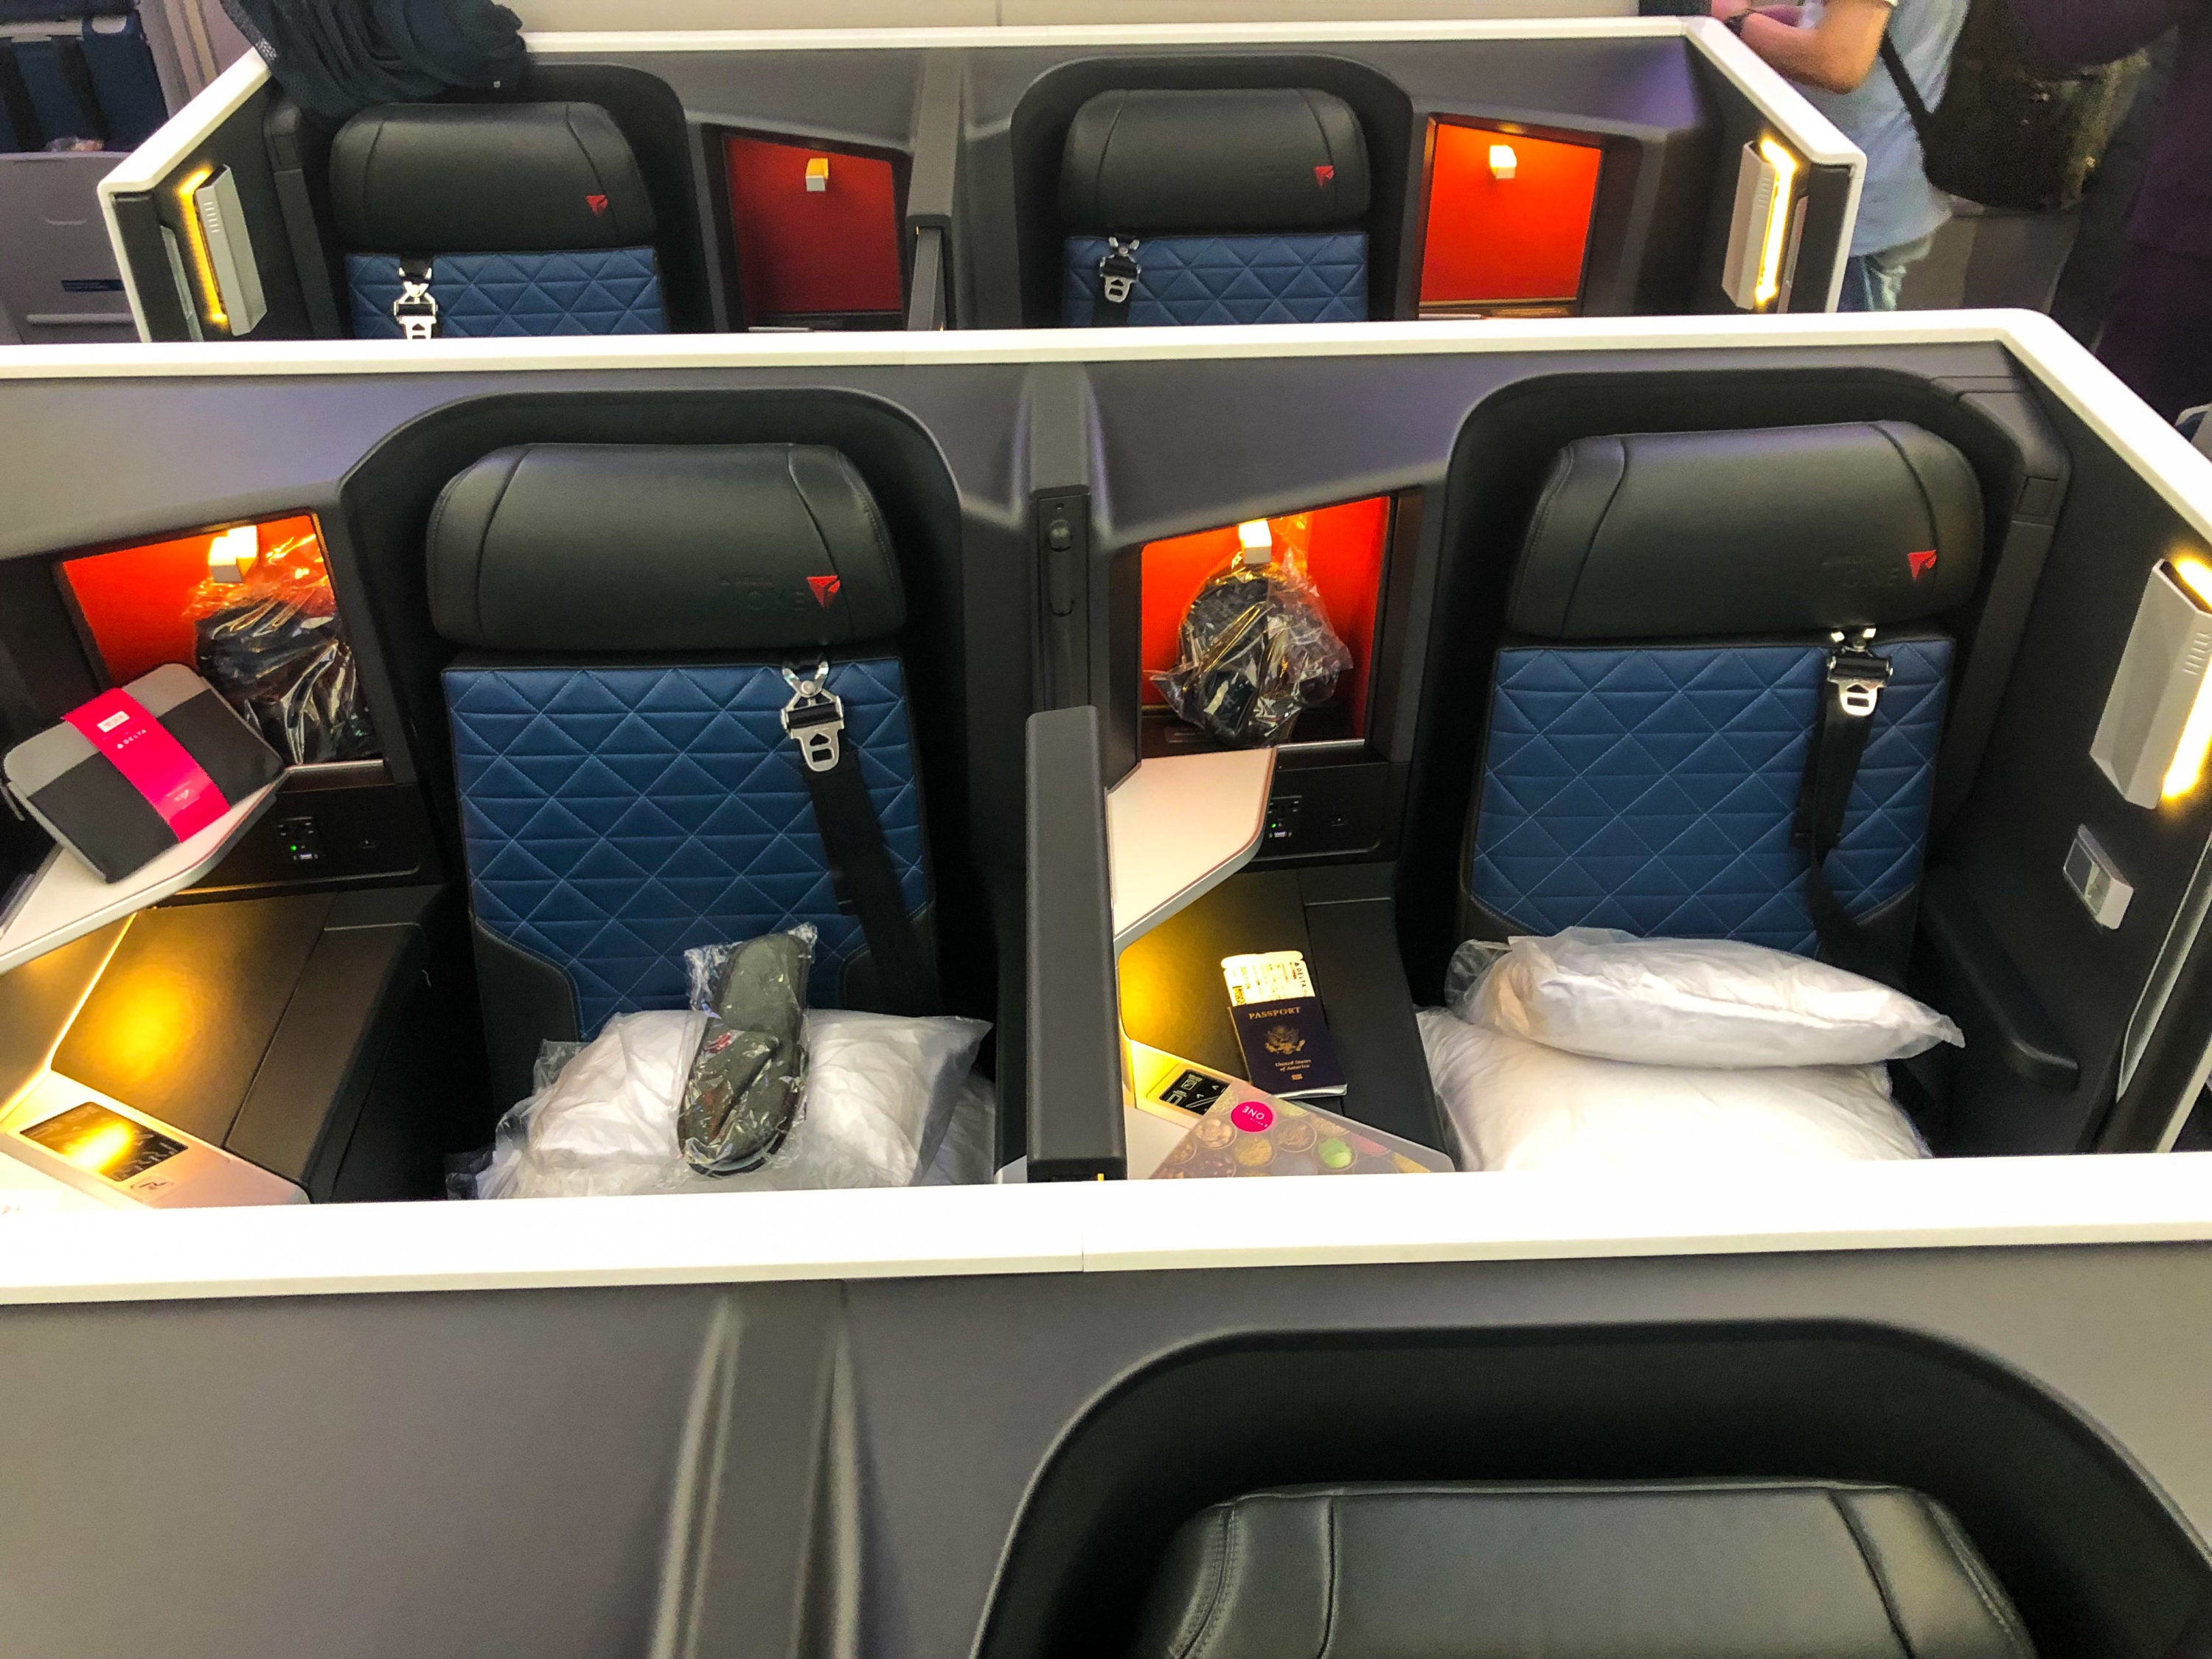 Delta One Suites A350-900 seats 8B and 8C